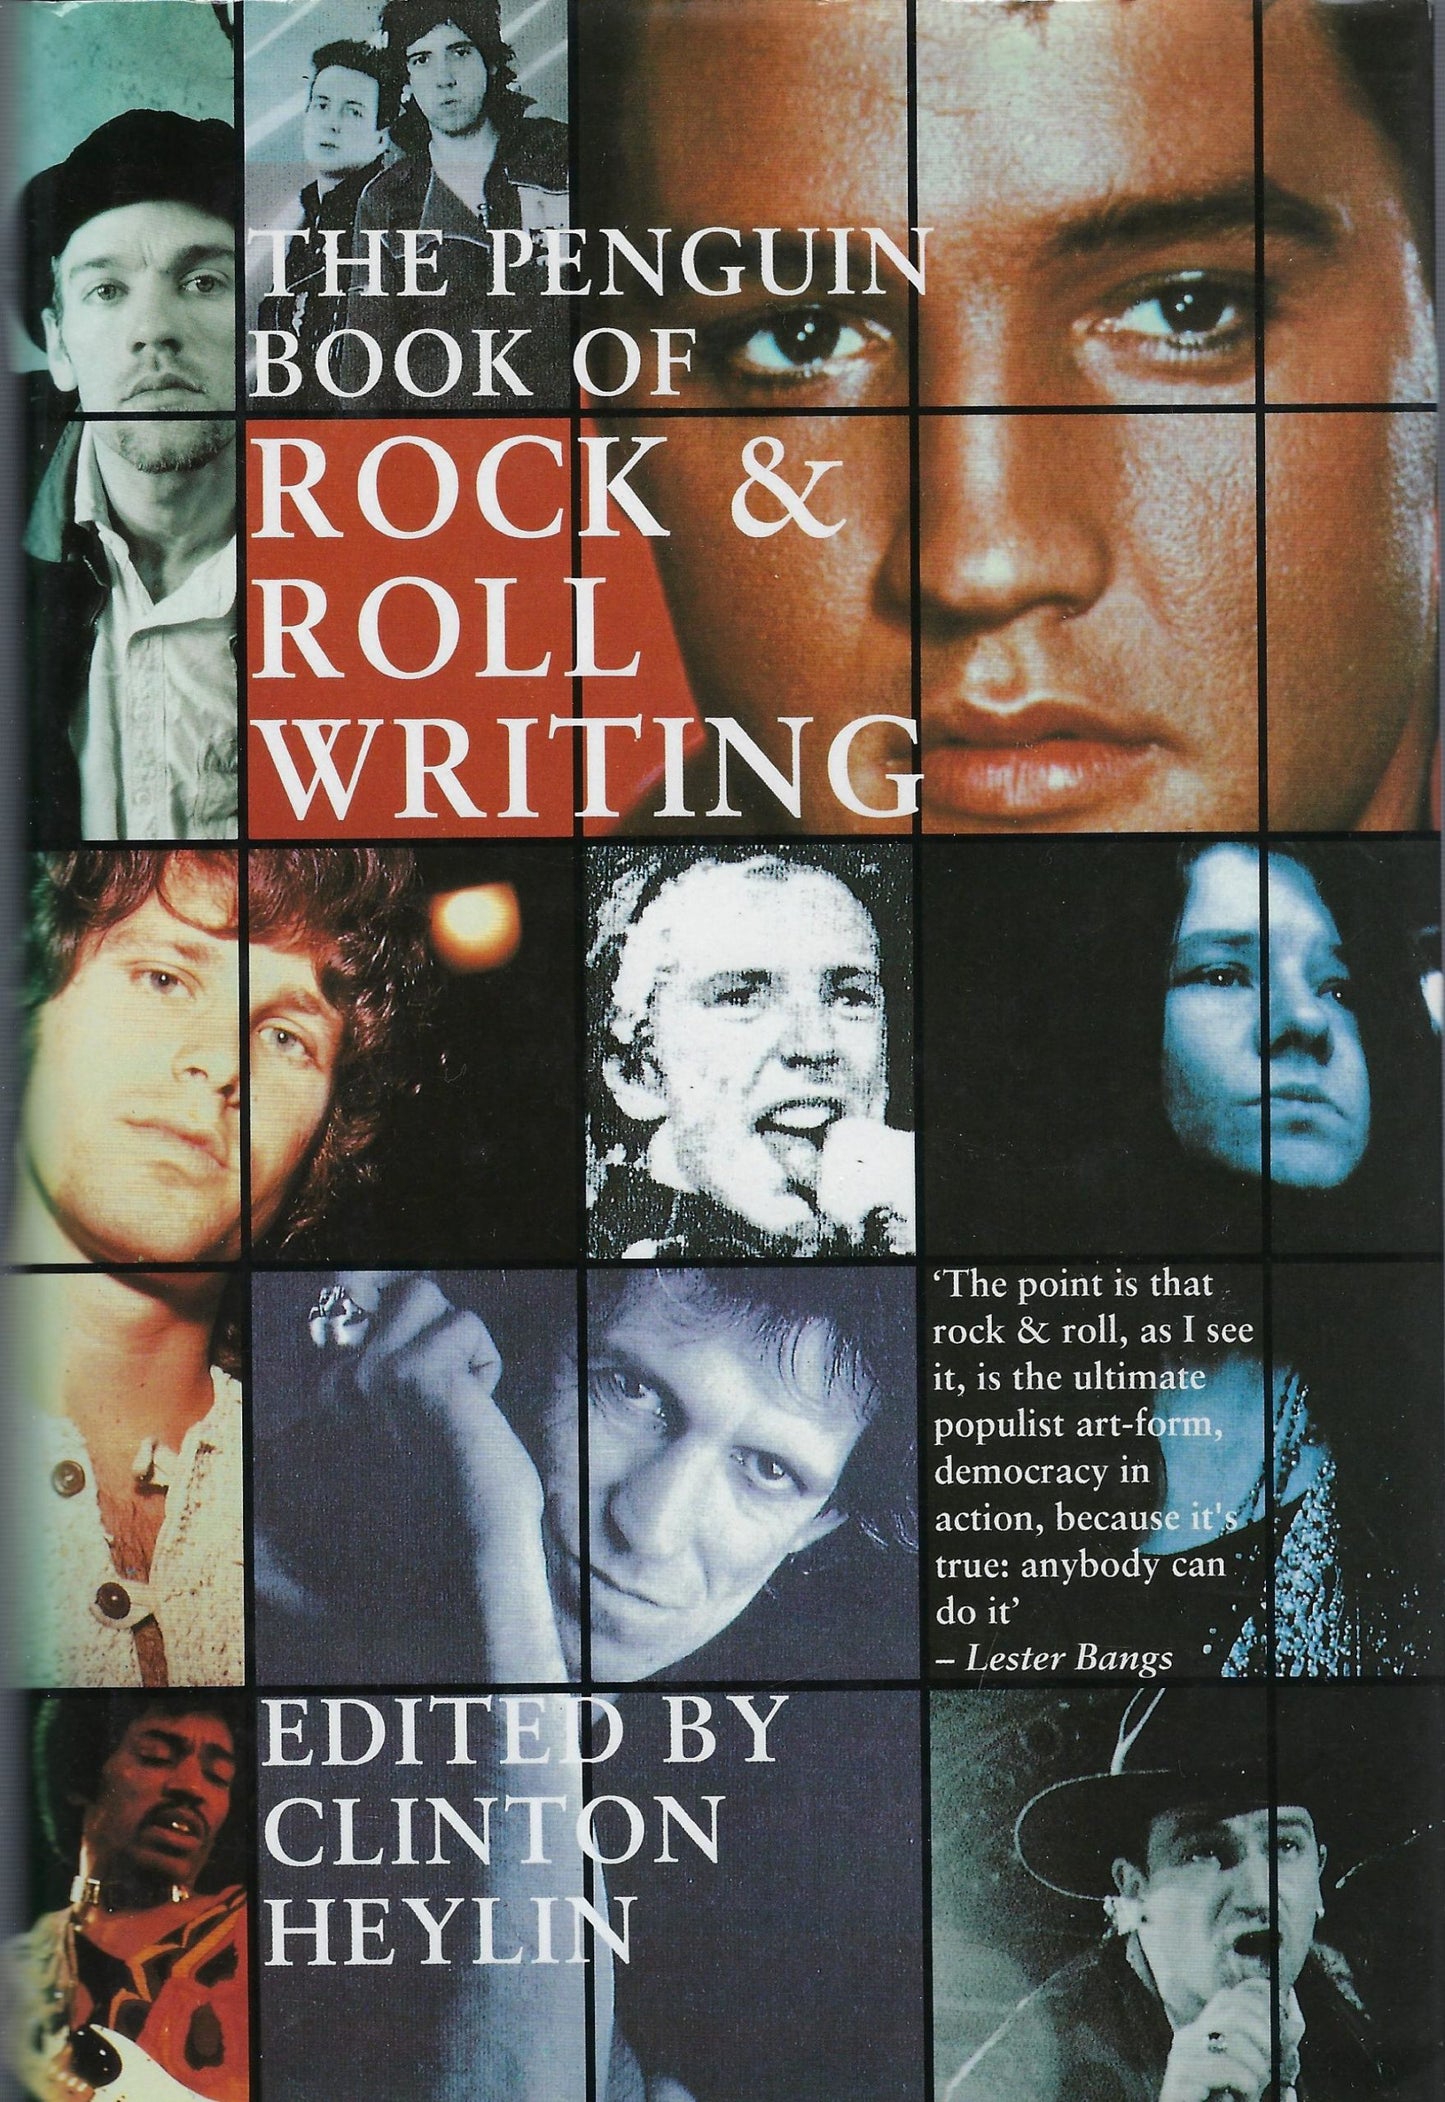 The Penguin book of Rock & Roll writing